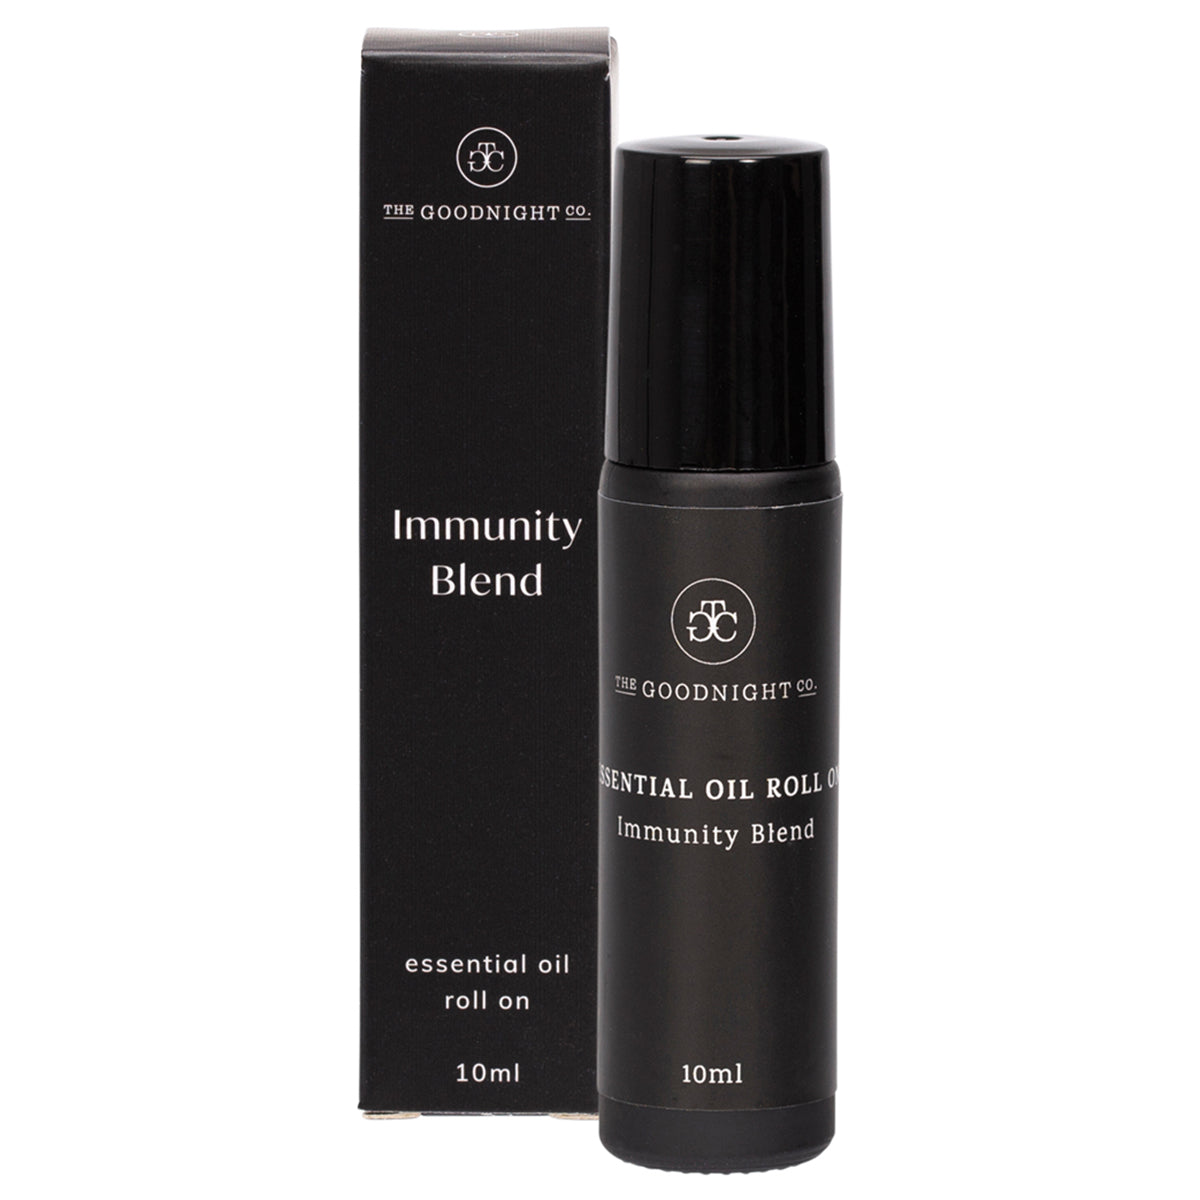 The Goodnight Co Essential Oil Roll On Immunity Blend